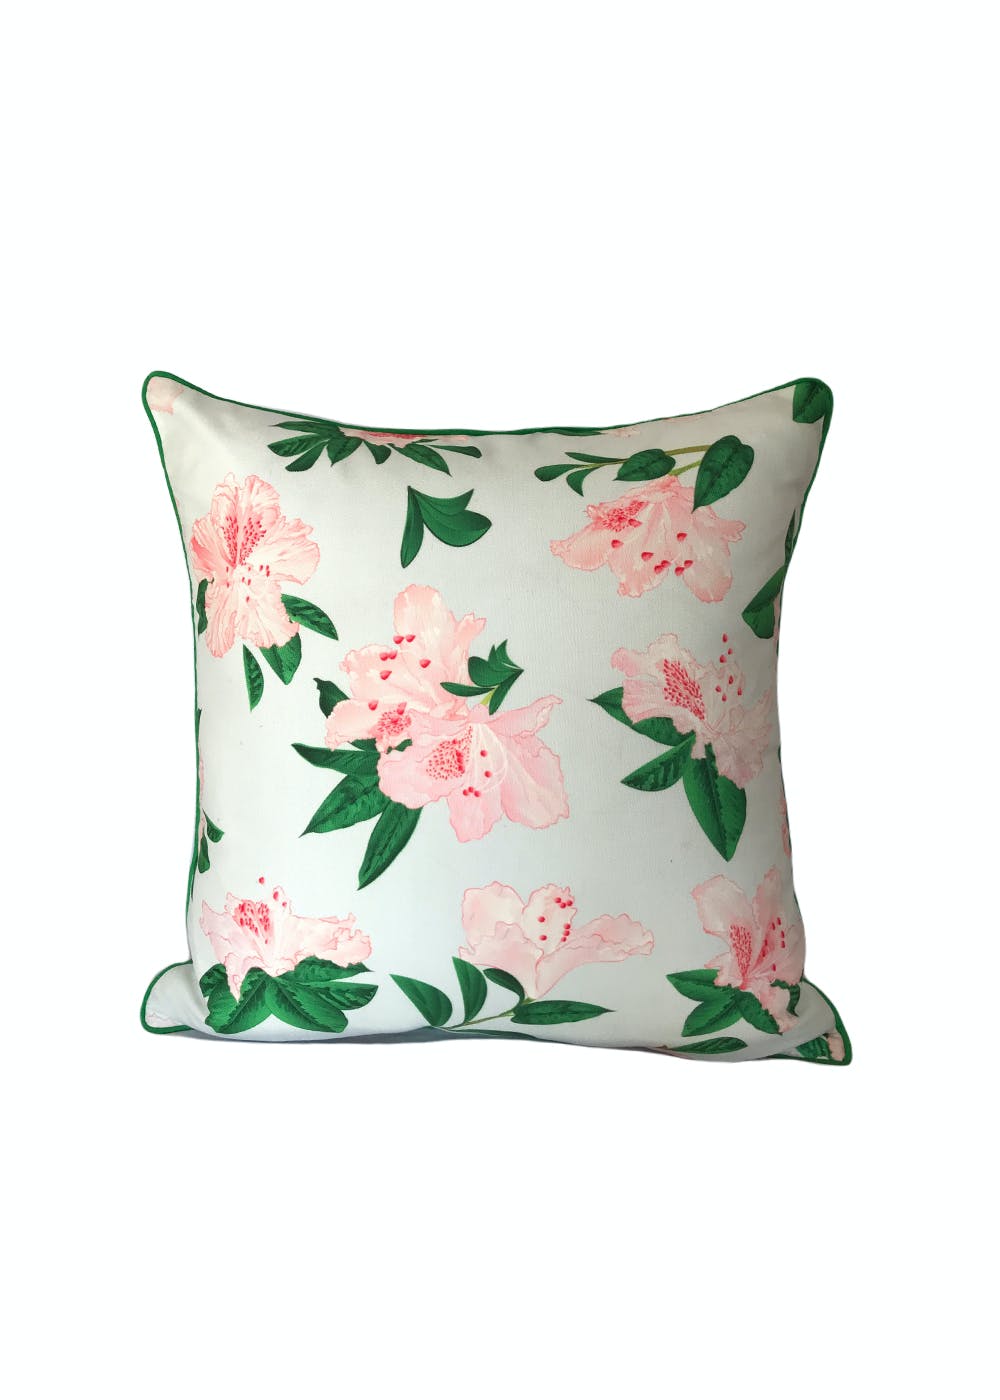 Guras Square Pillow Cover Light Pink - 20x20 inches